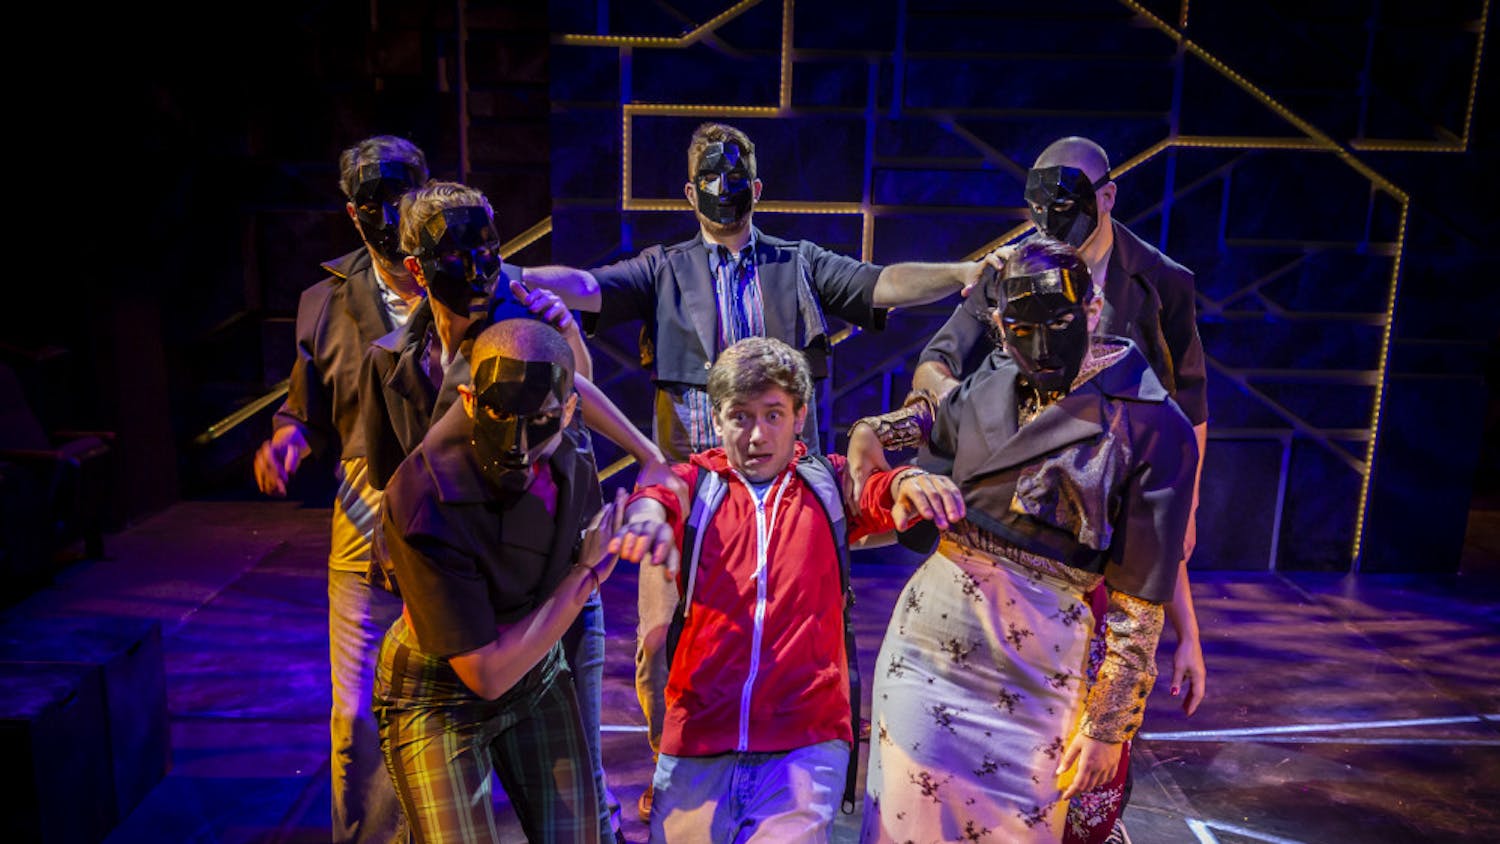 Actor Kyle Brumley (center) portrays 15-year-old Christopher in "The Curious Incident of the Dog in the Night-Time". This scene gives the audience a visual representation of the jarring experience Christopher has when interacting with the outside world.